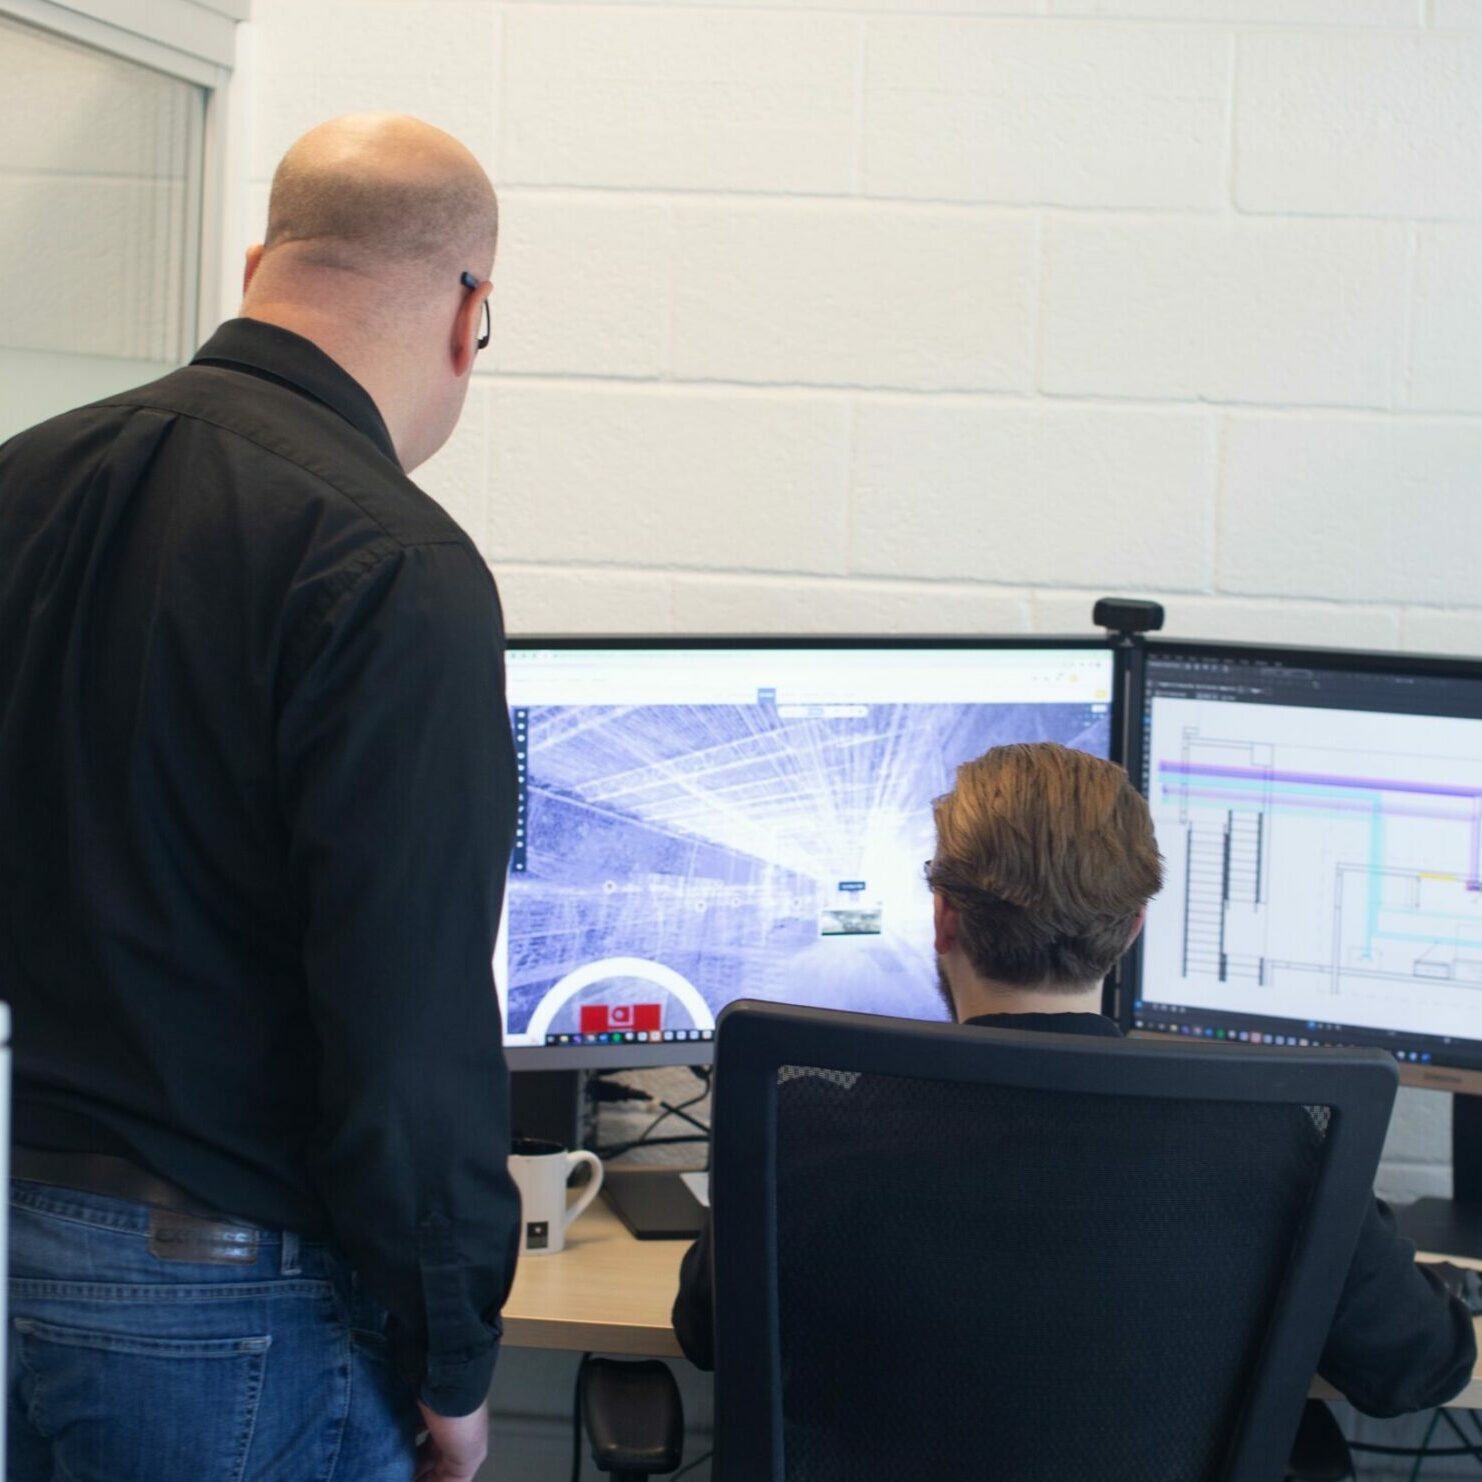 Electrical designers reviewing a scan-to-bim image on a computer